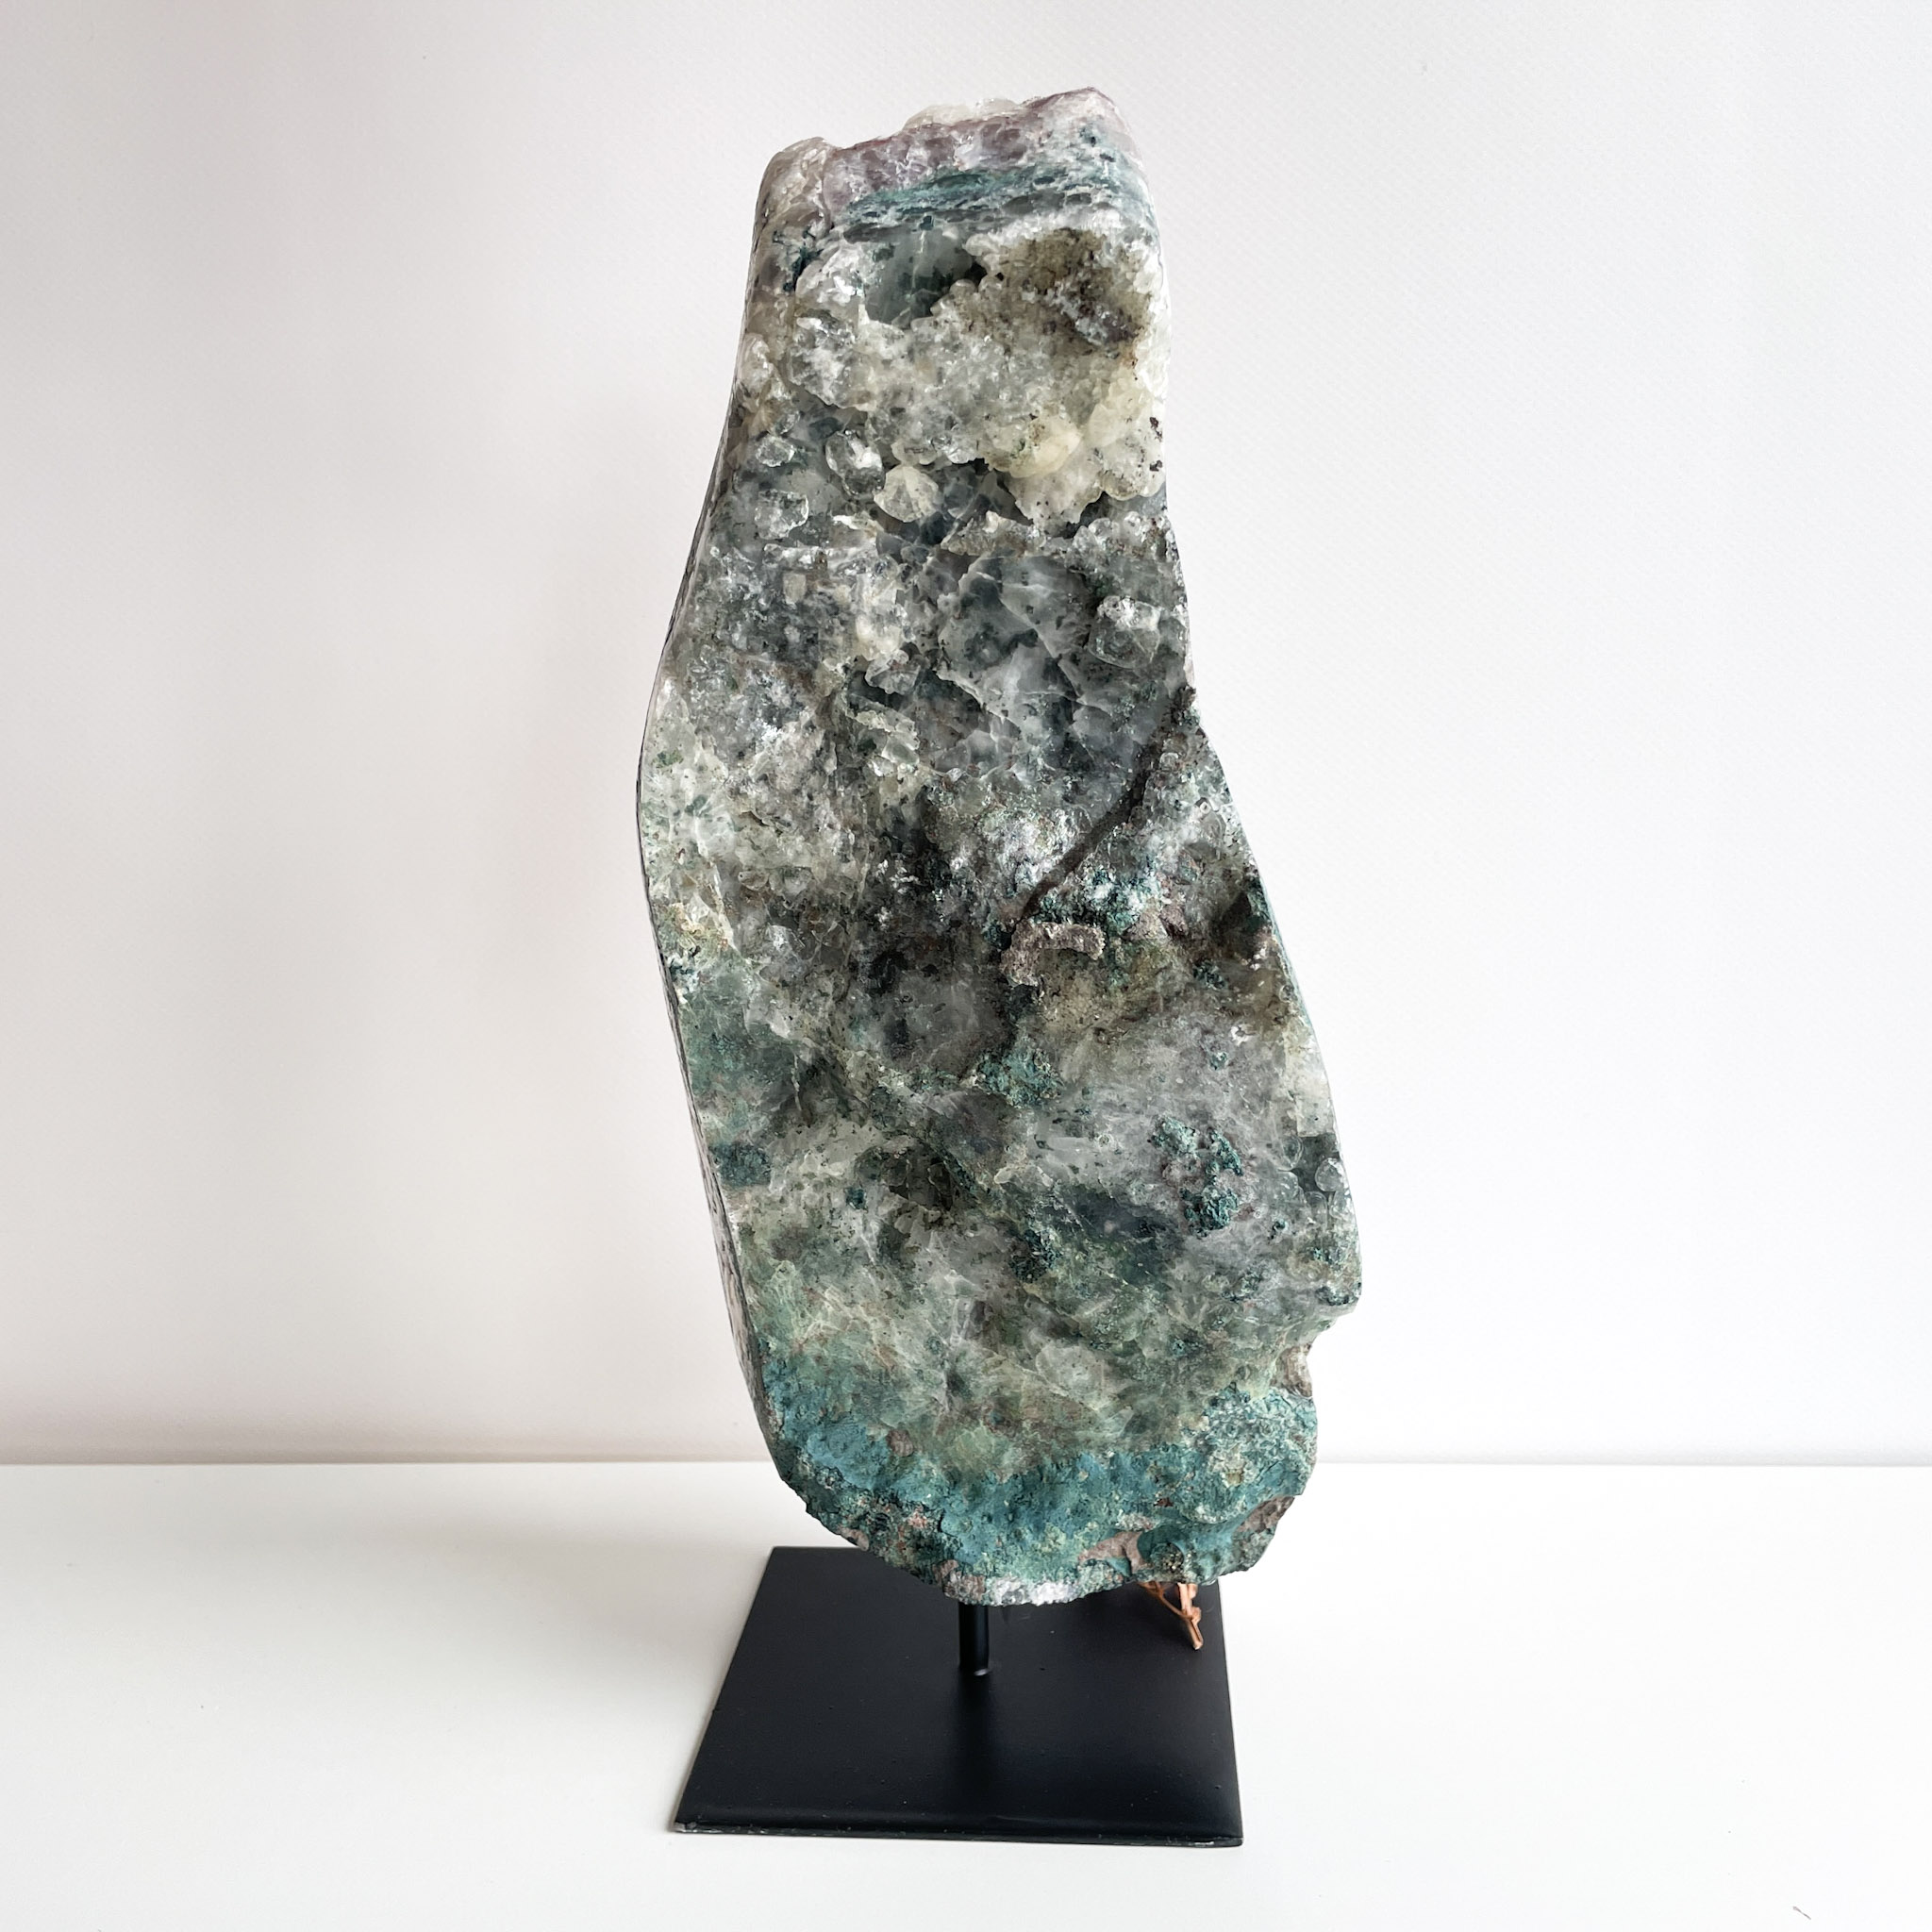 A large, multicolored mineral specimen mounted upright on a black display stand with a white background.